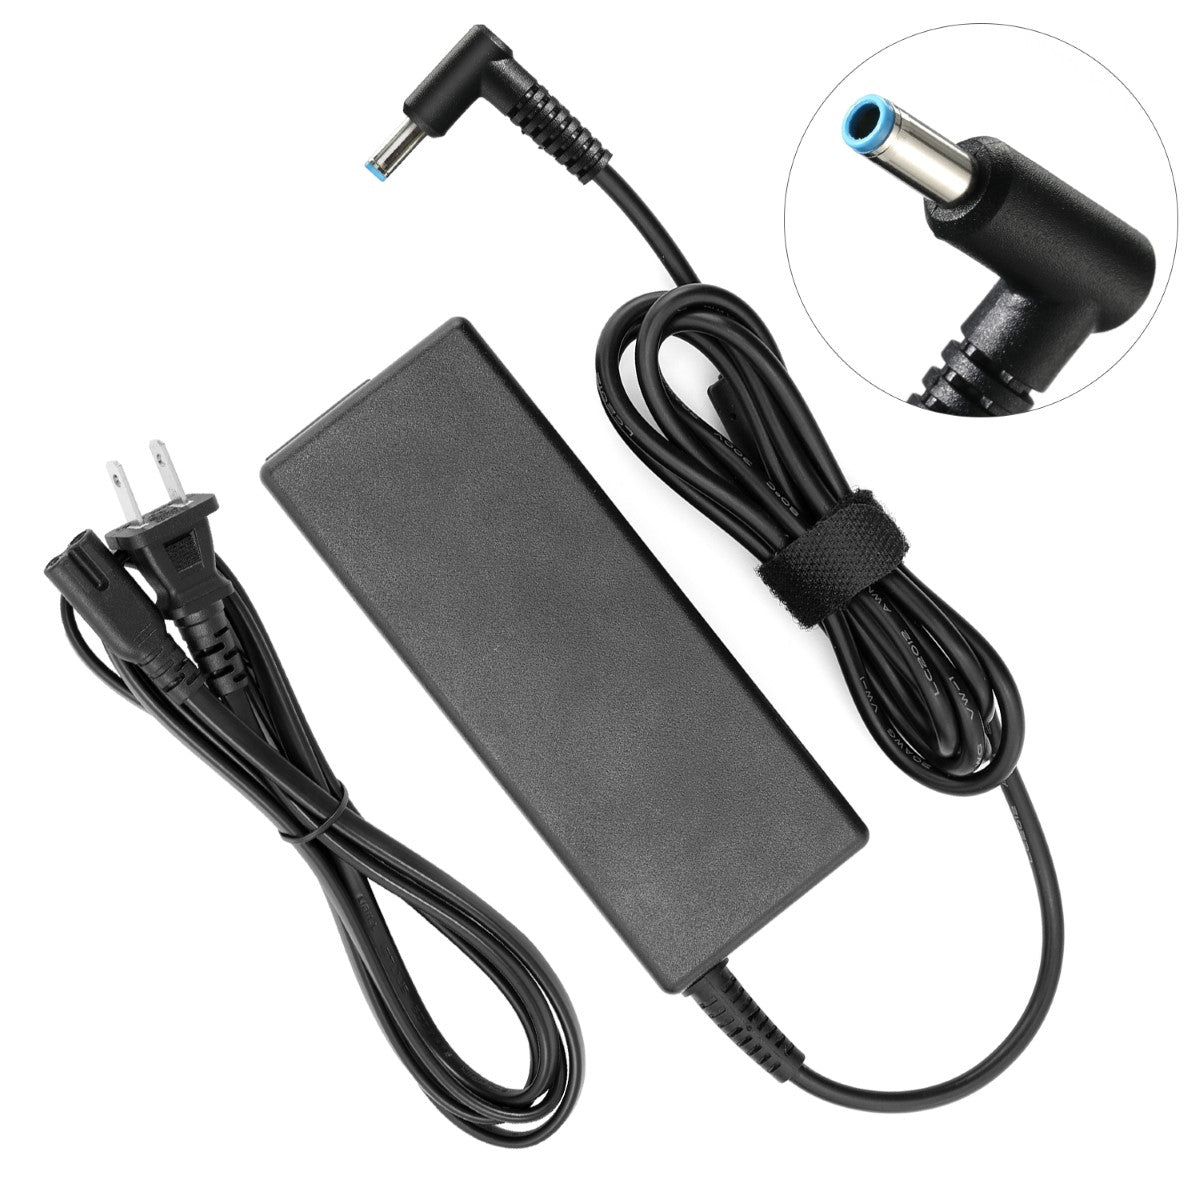 AC Adapter Charger for HP Envy TouchSmart 17-j060us Notebook.